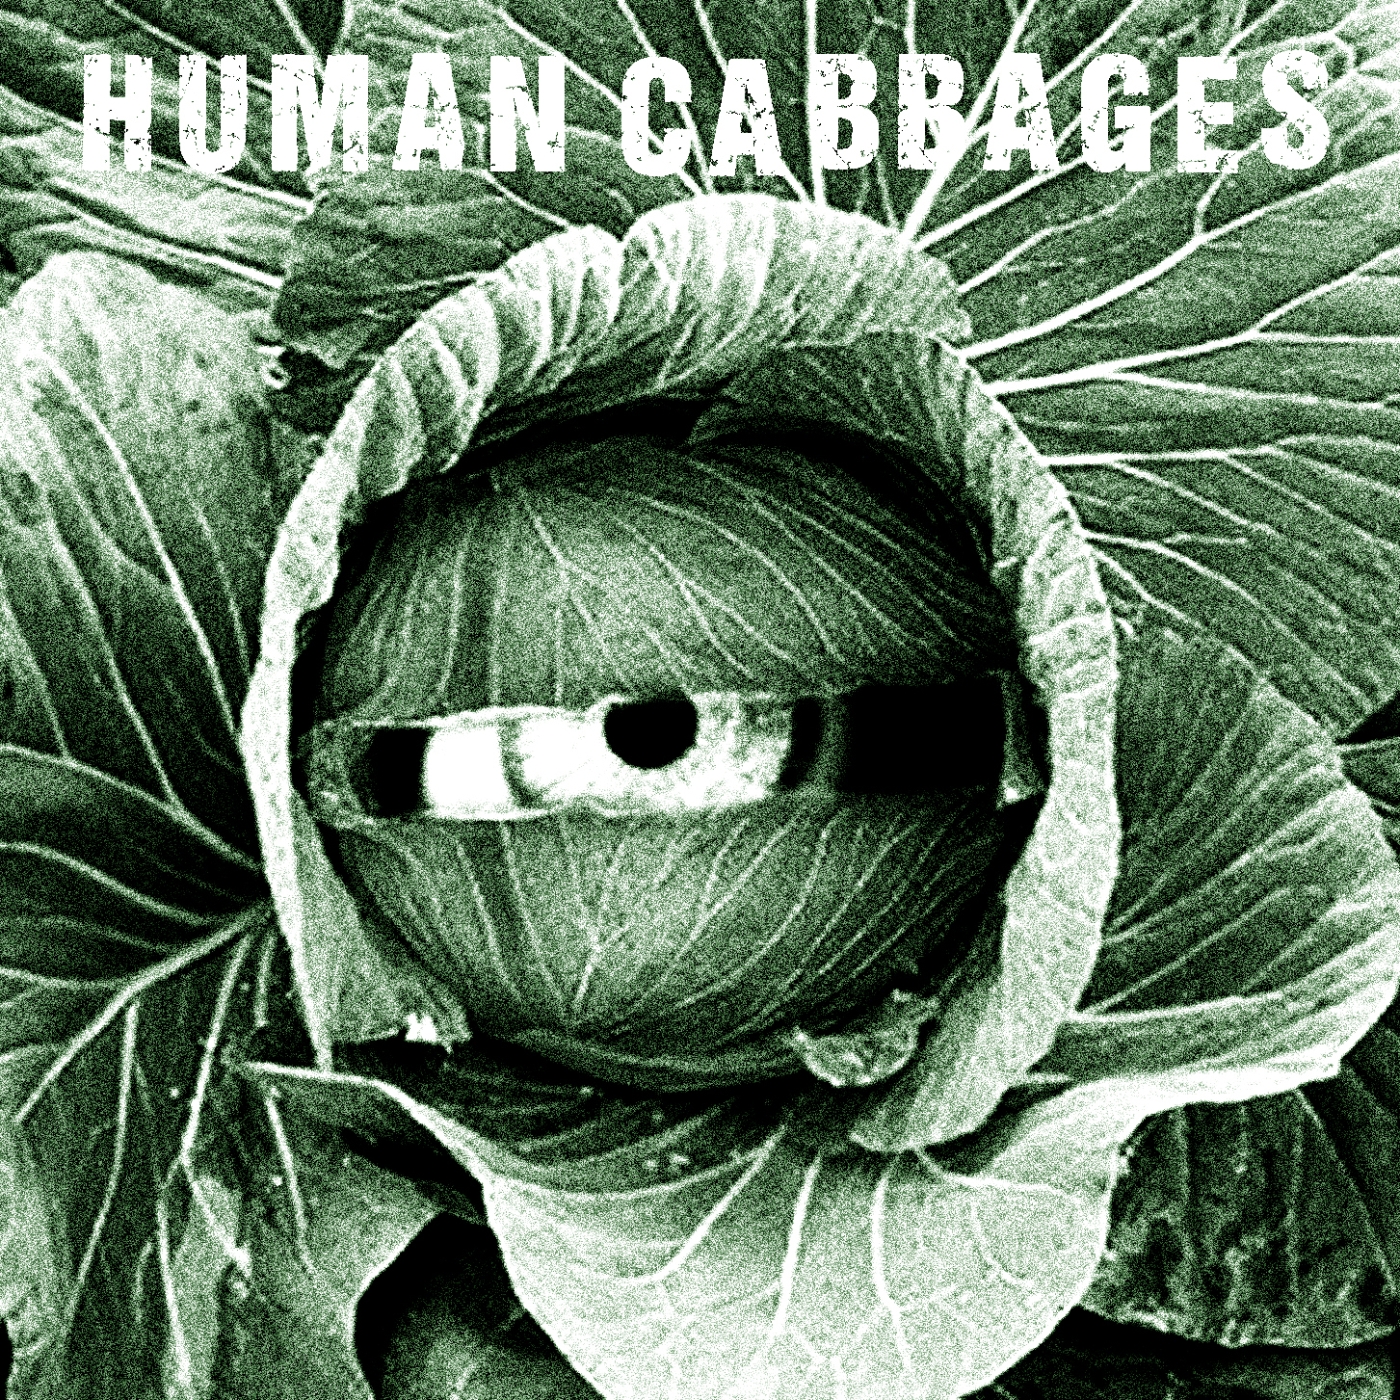 Human Cabbages